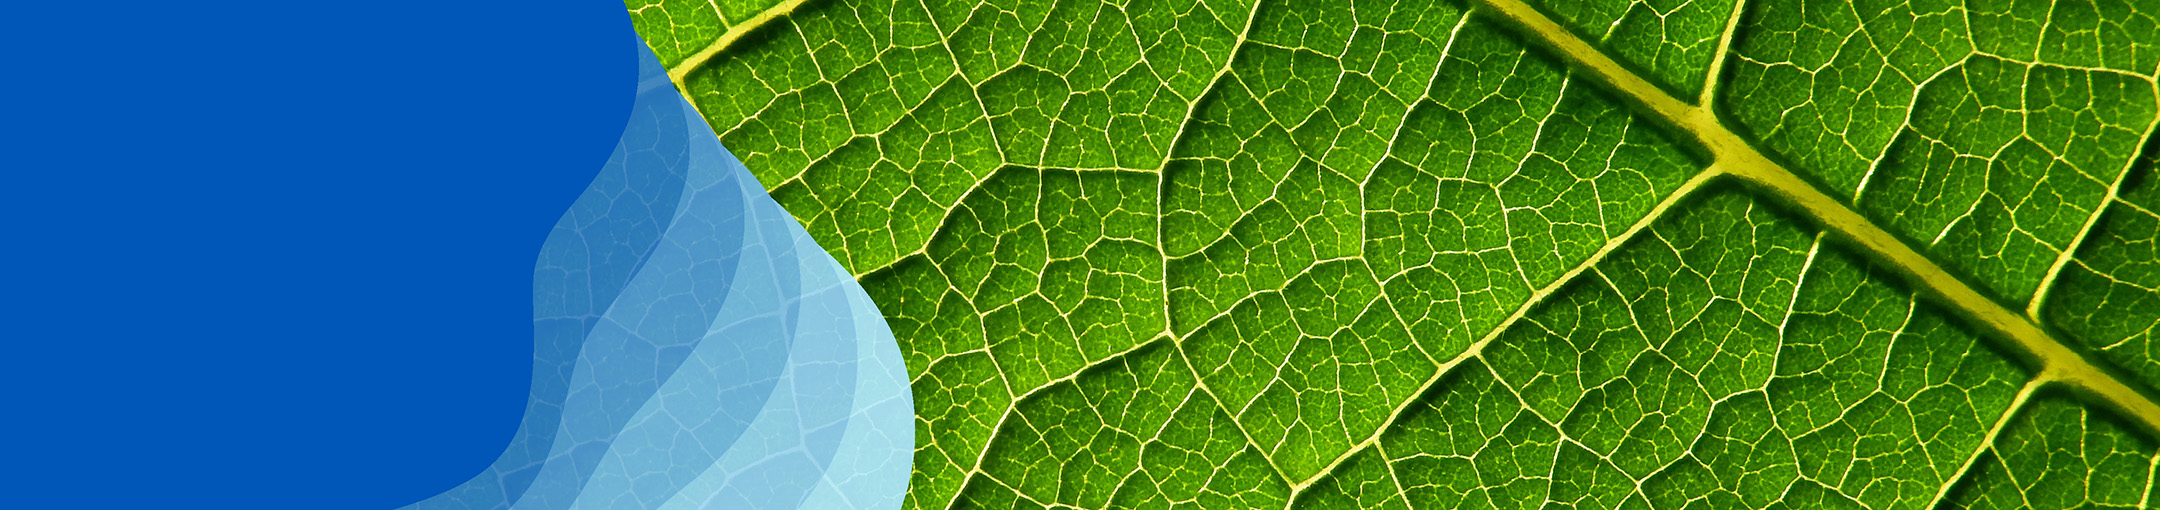 a green leaf and its veins with solid blob of blue color to the left side